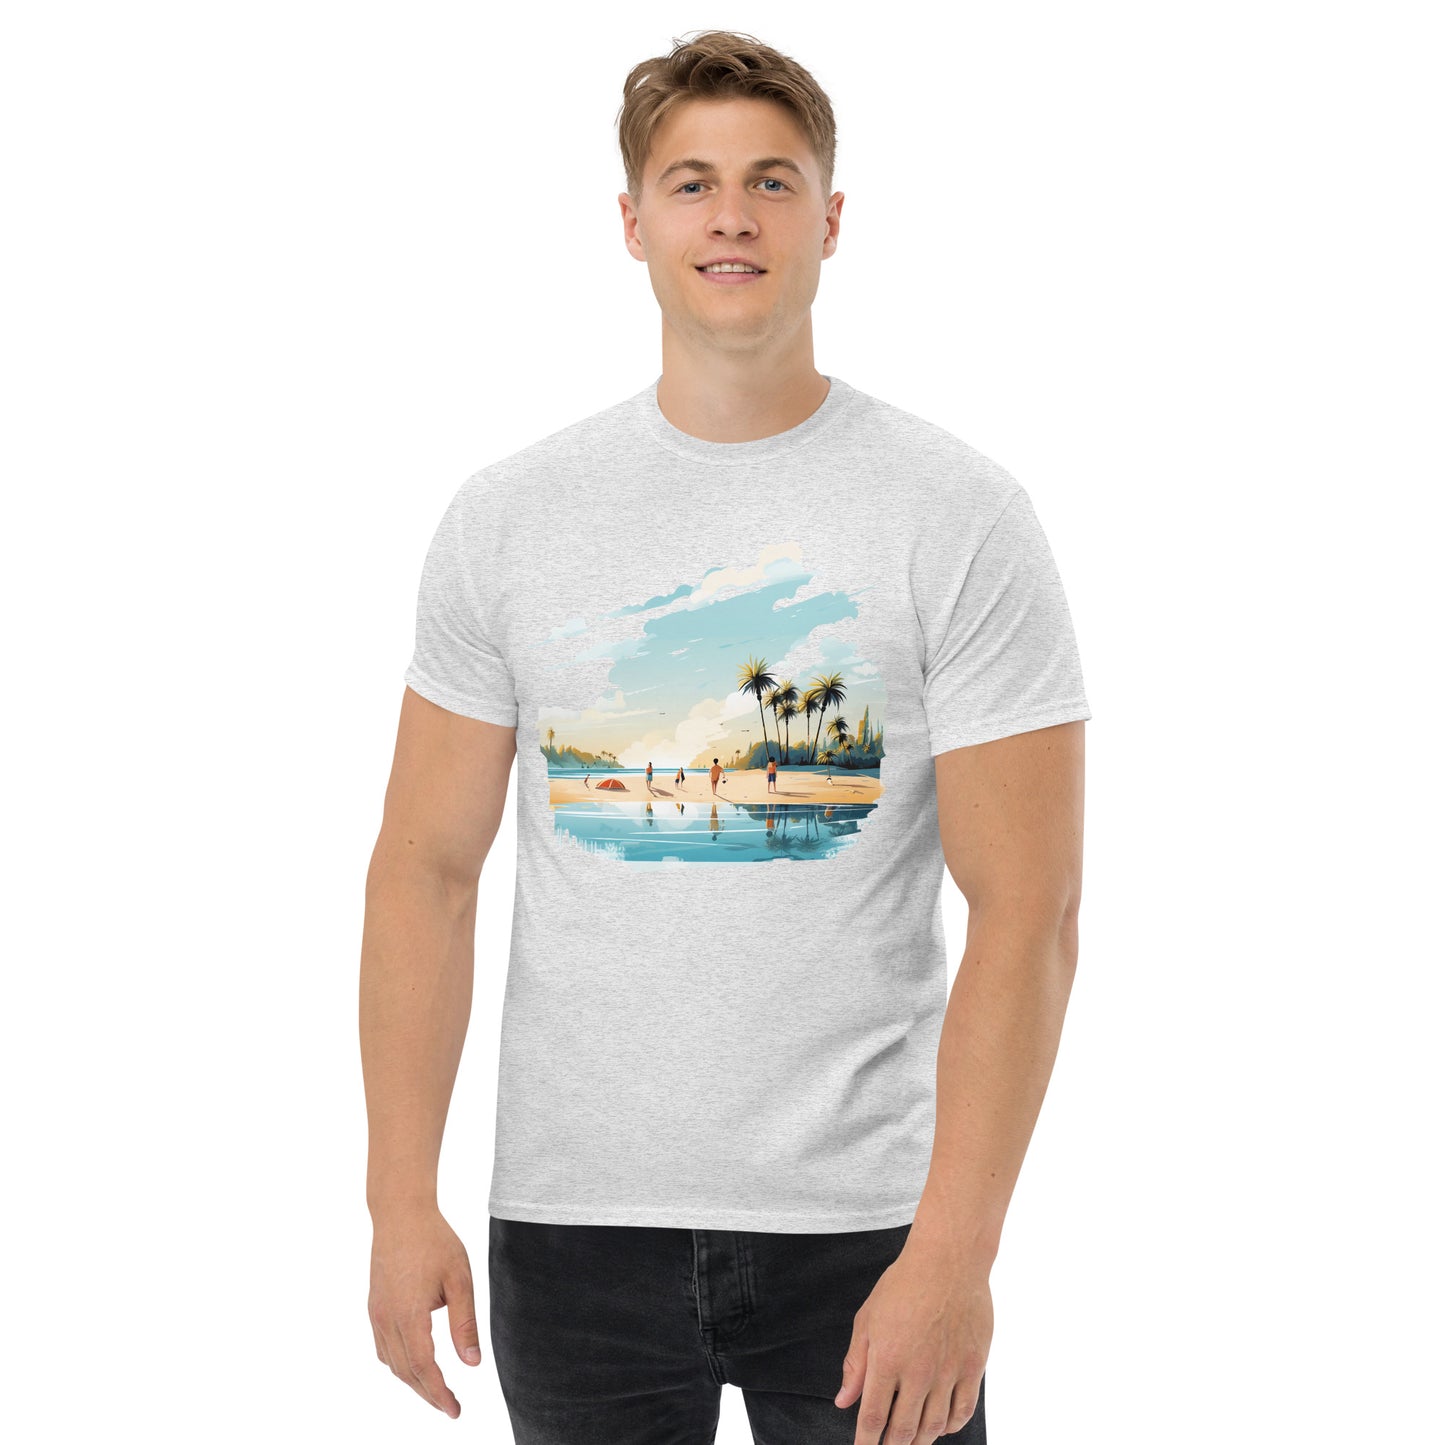 Men with ash T-shirt and a picture of a island with sea and sand